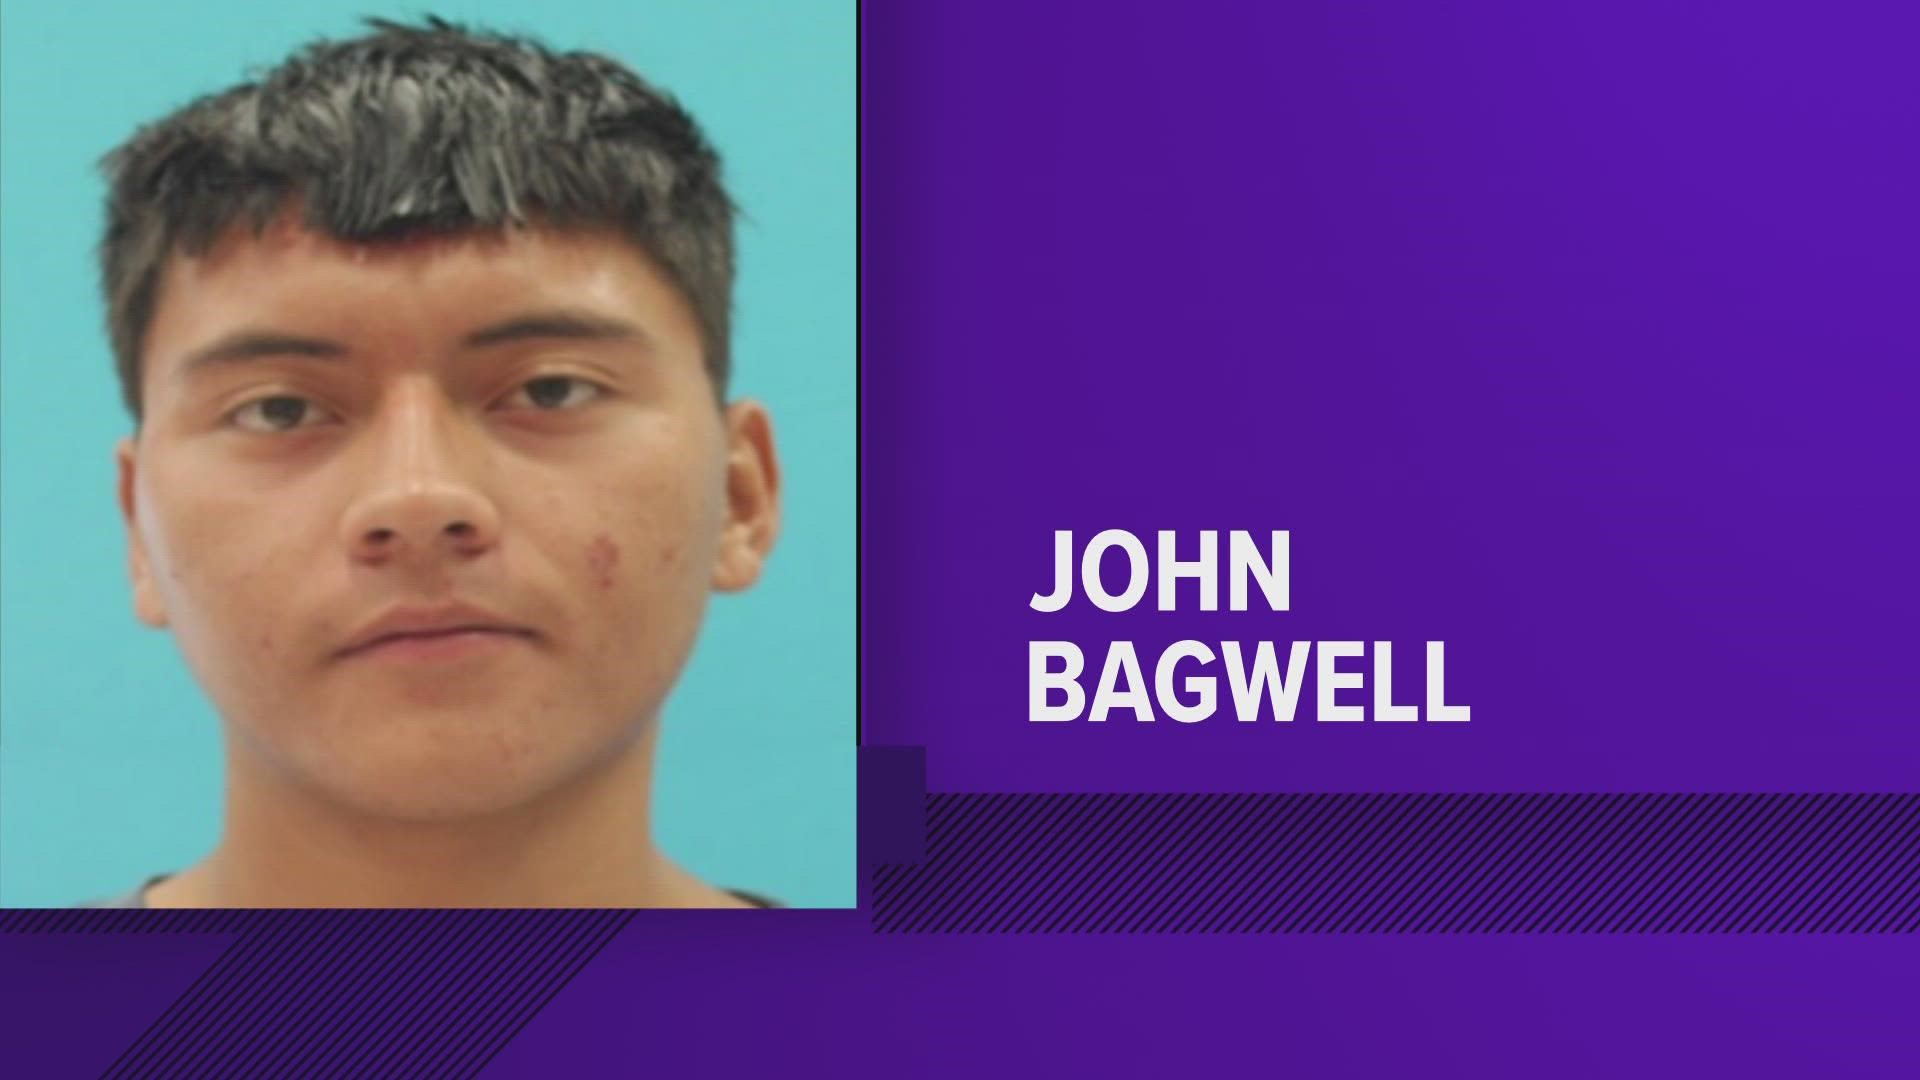 John W. Bagwell was arrested in connection with the death of Jose Alberto Aguirre Castellanos outside the gym near West Slaughter Lane and Menchaca Road.